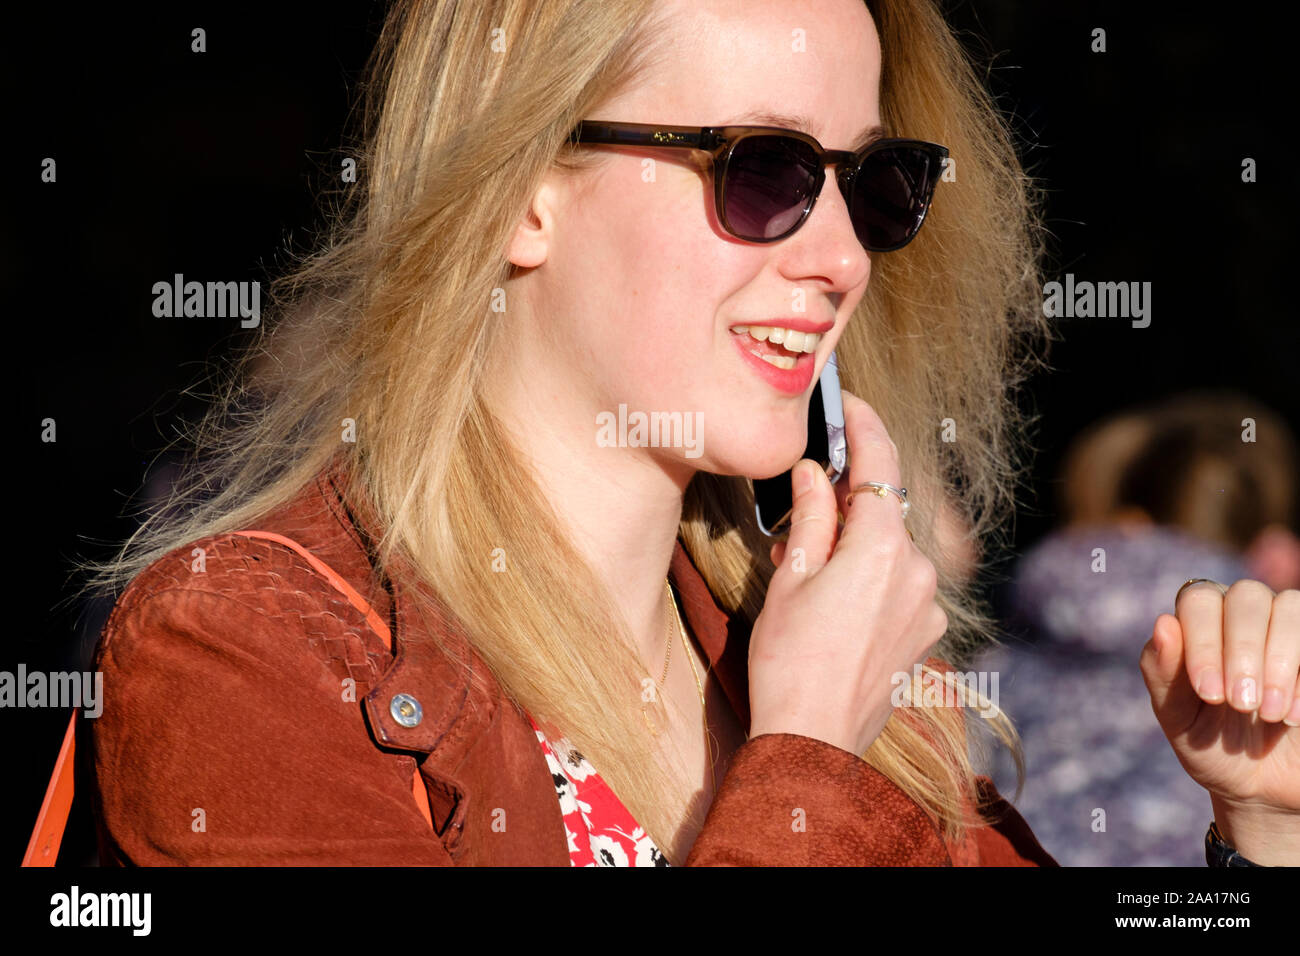 Female, 20s, blonde hair,  fashionable casual dress, sunglasses, using mobile phone, smiling. Stock Photo